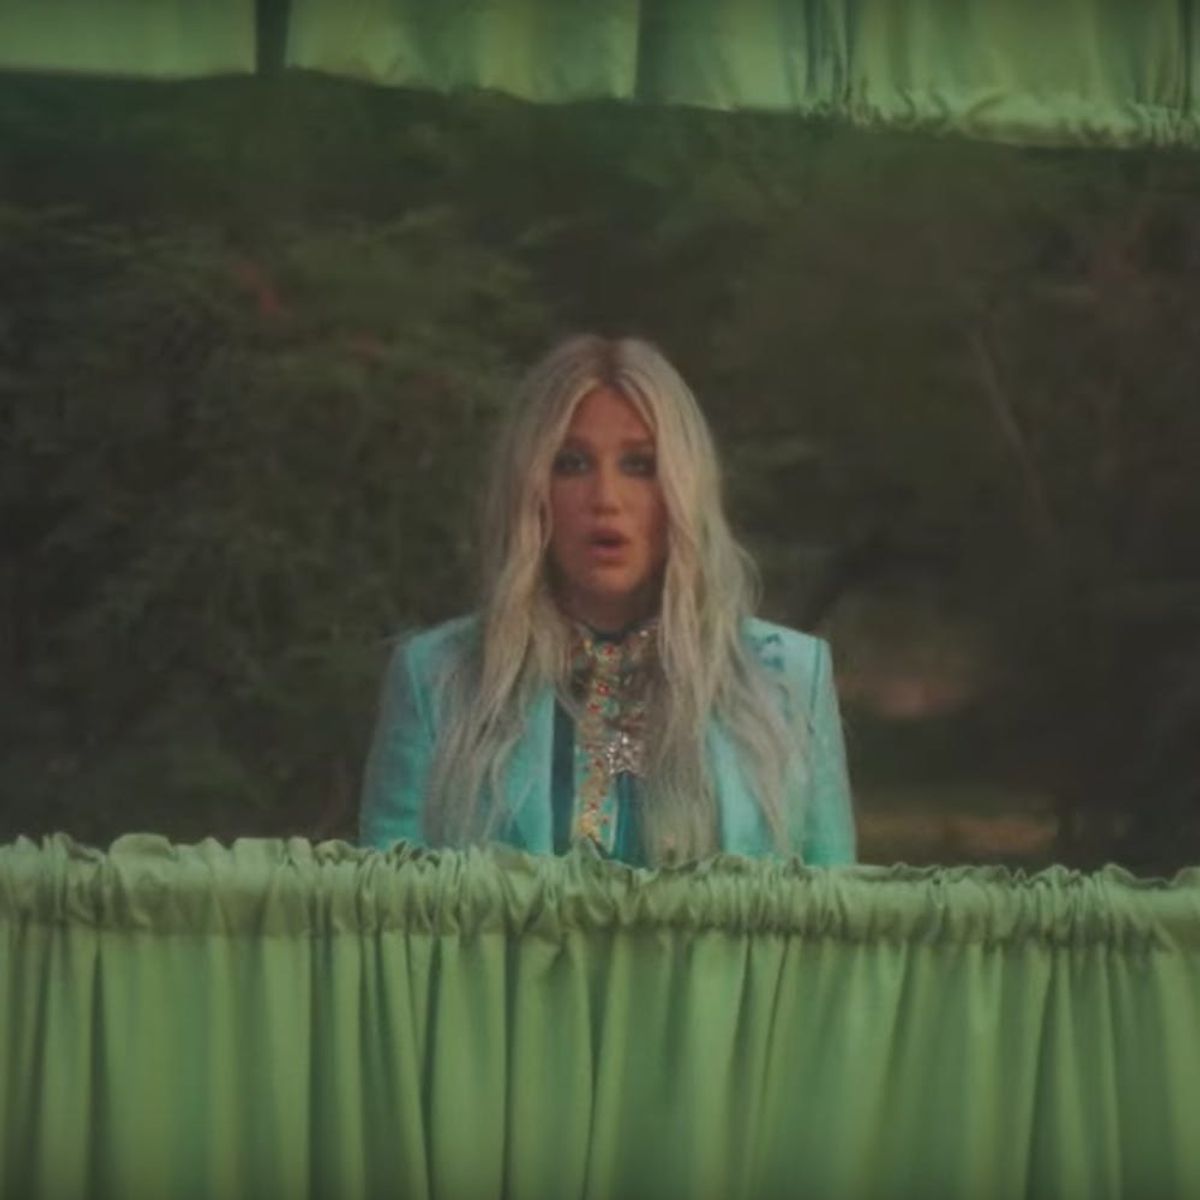 Kesha’s New Video Shows Us Why We Should “Learn to Let Go”